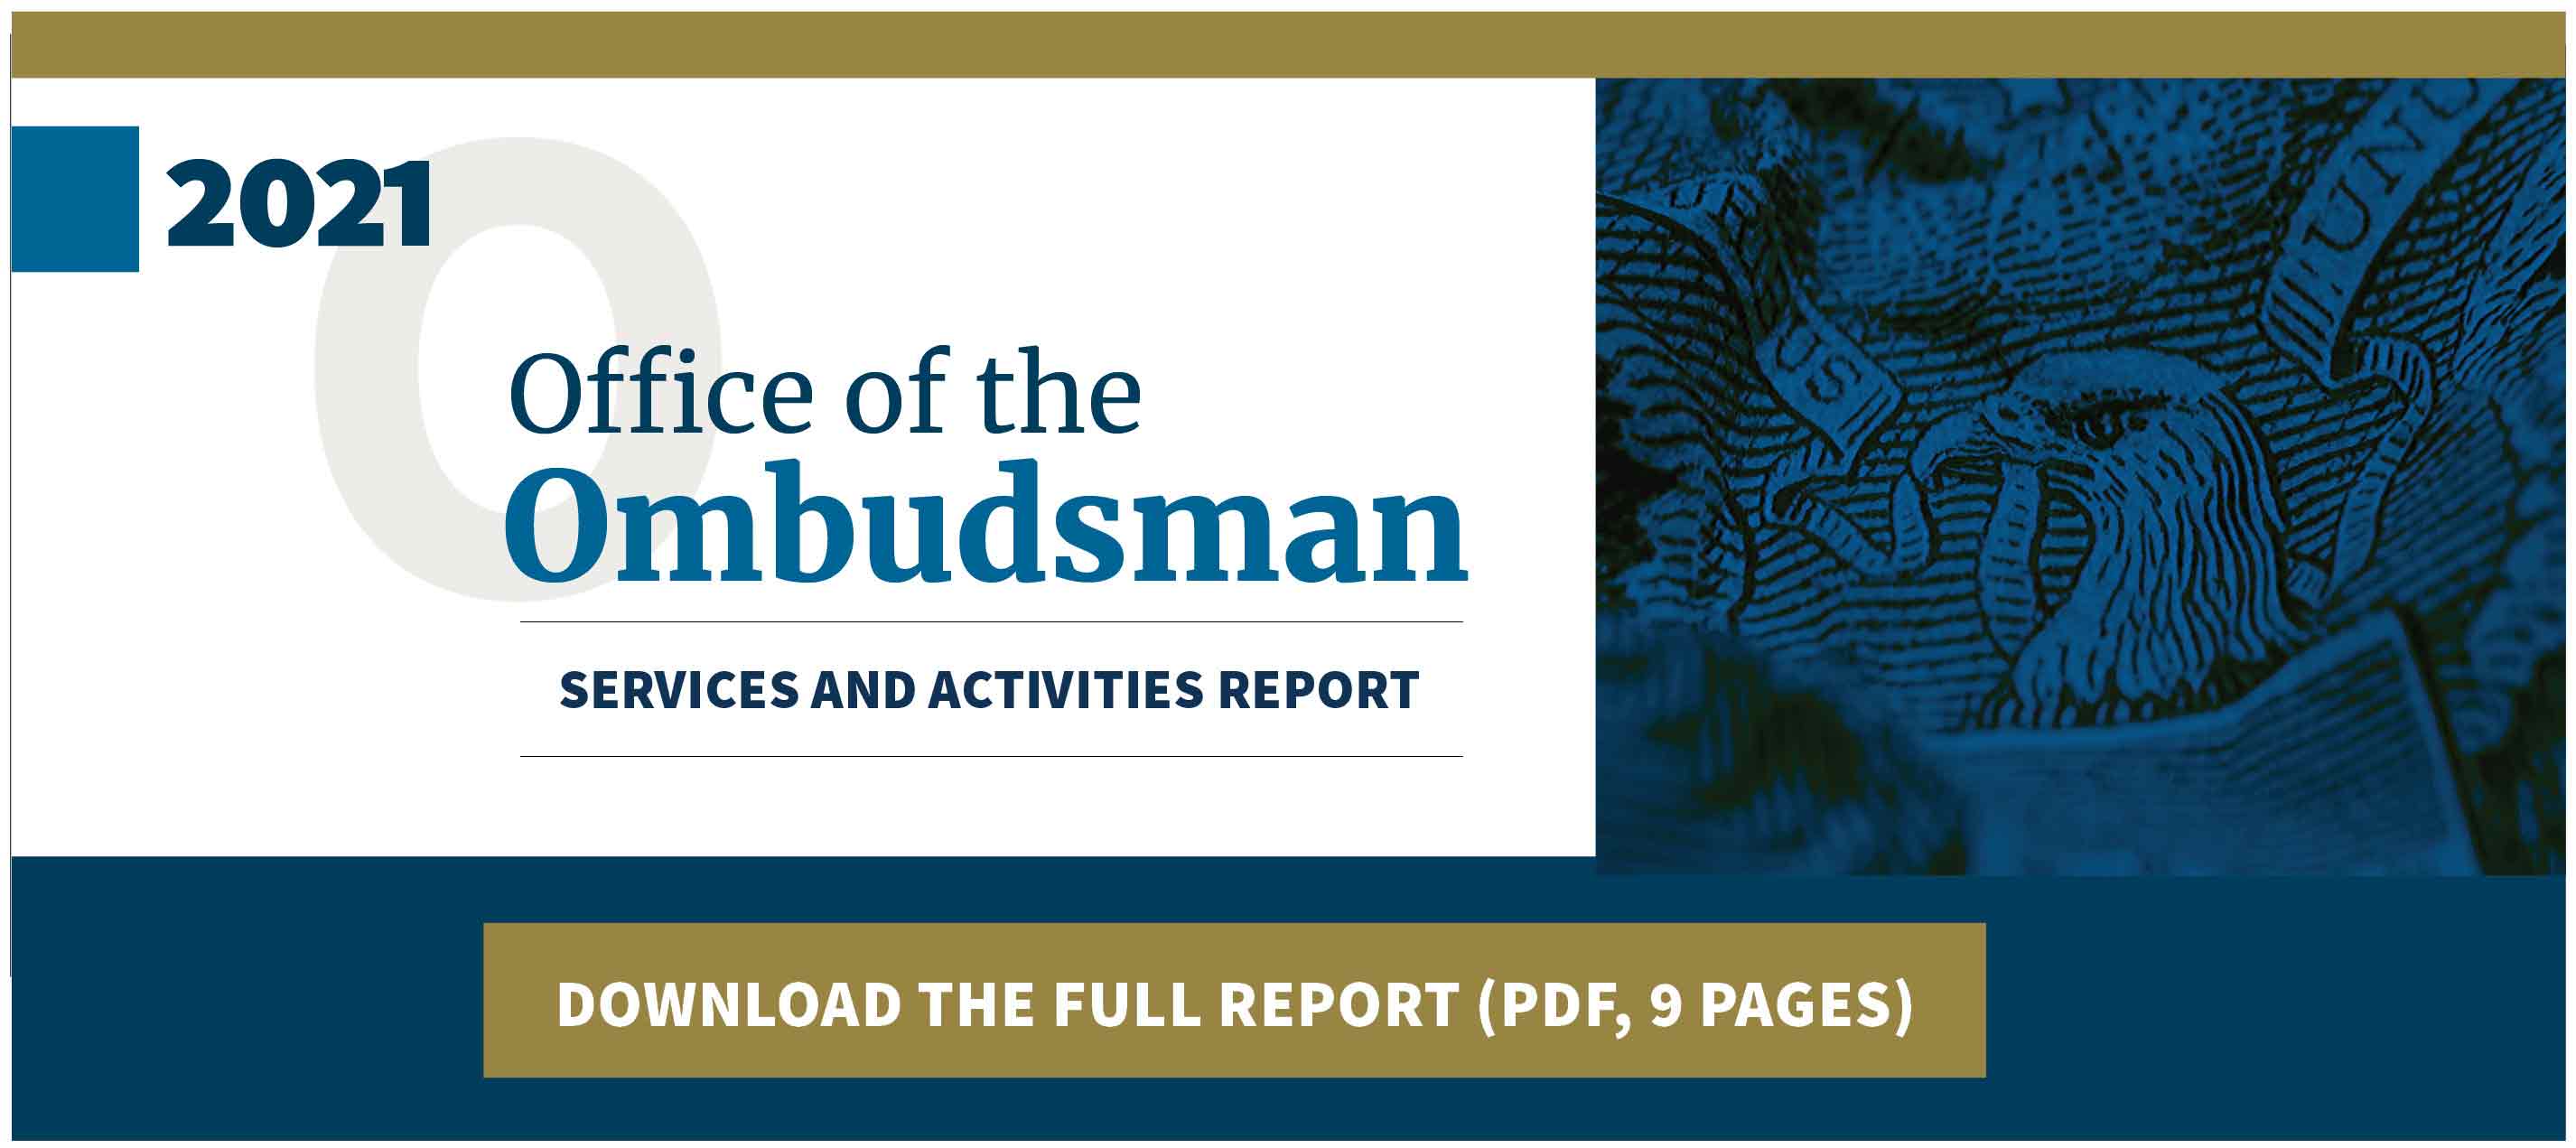 2021 Office of the Ombudsman Services and Activities Report - Download The Full Report (PDF, 9 Pages)